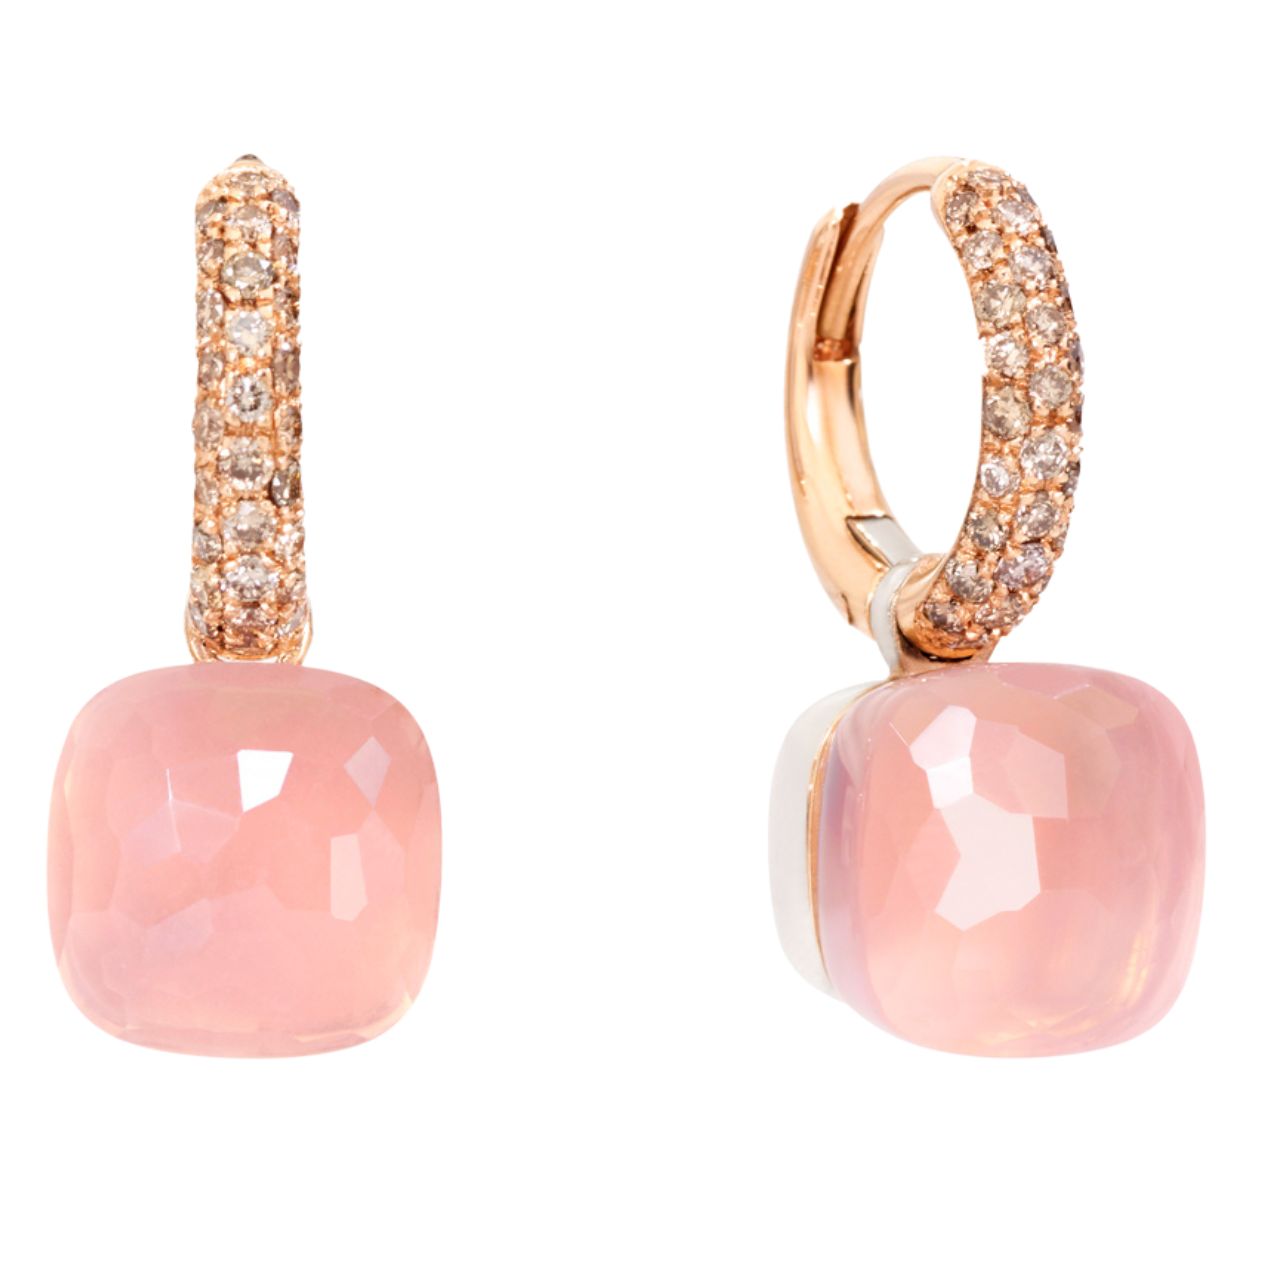 Nudo Classic Earrings featuring rose quartz and brown diamonds set in 18K rose gold.